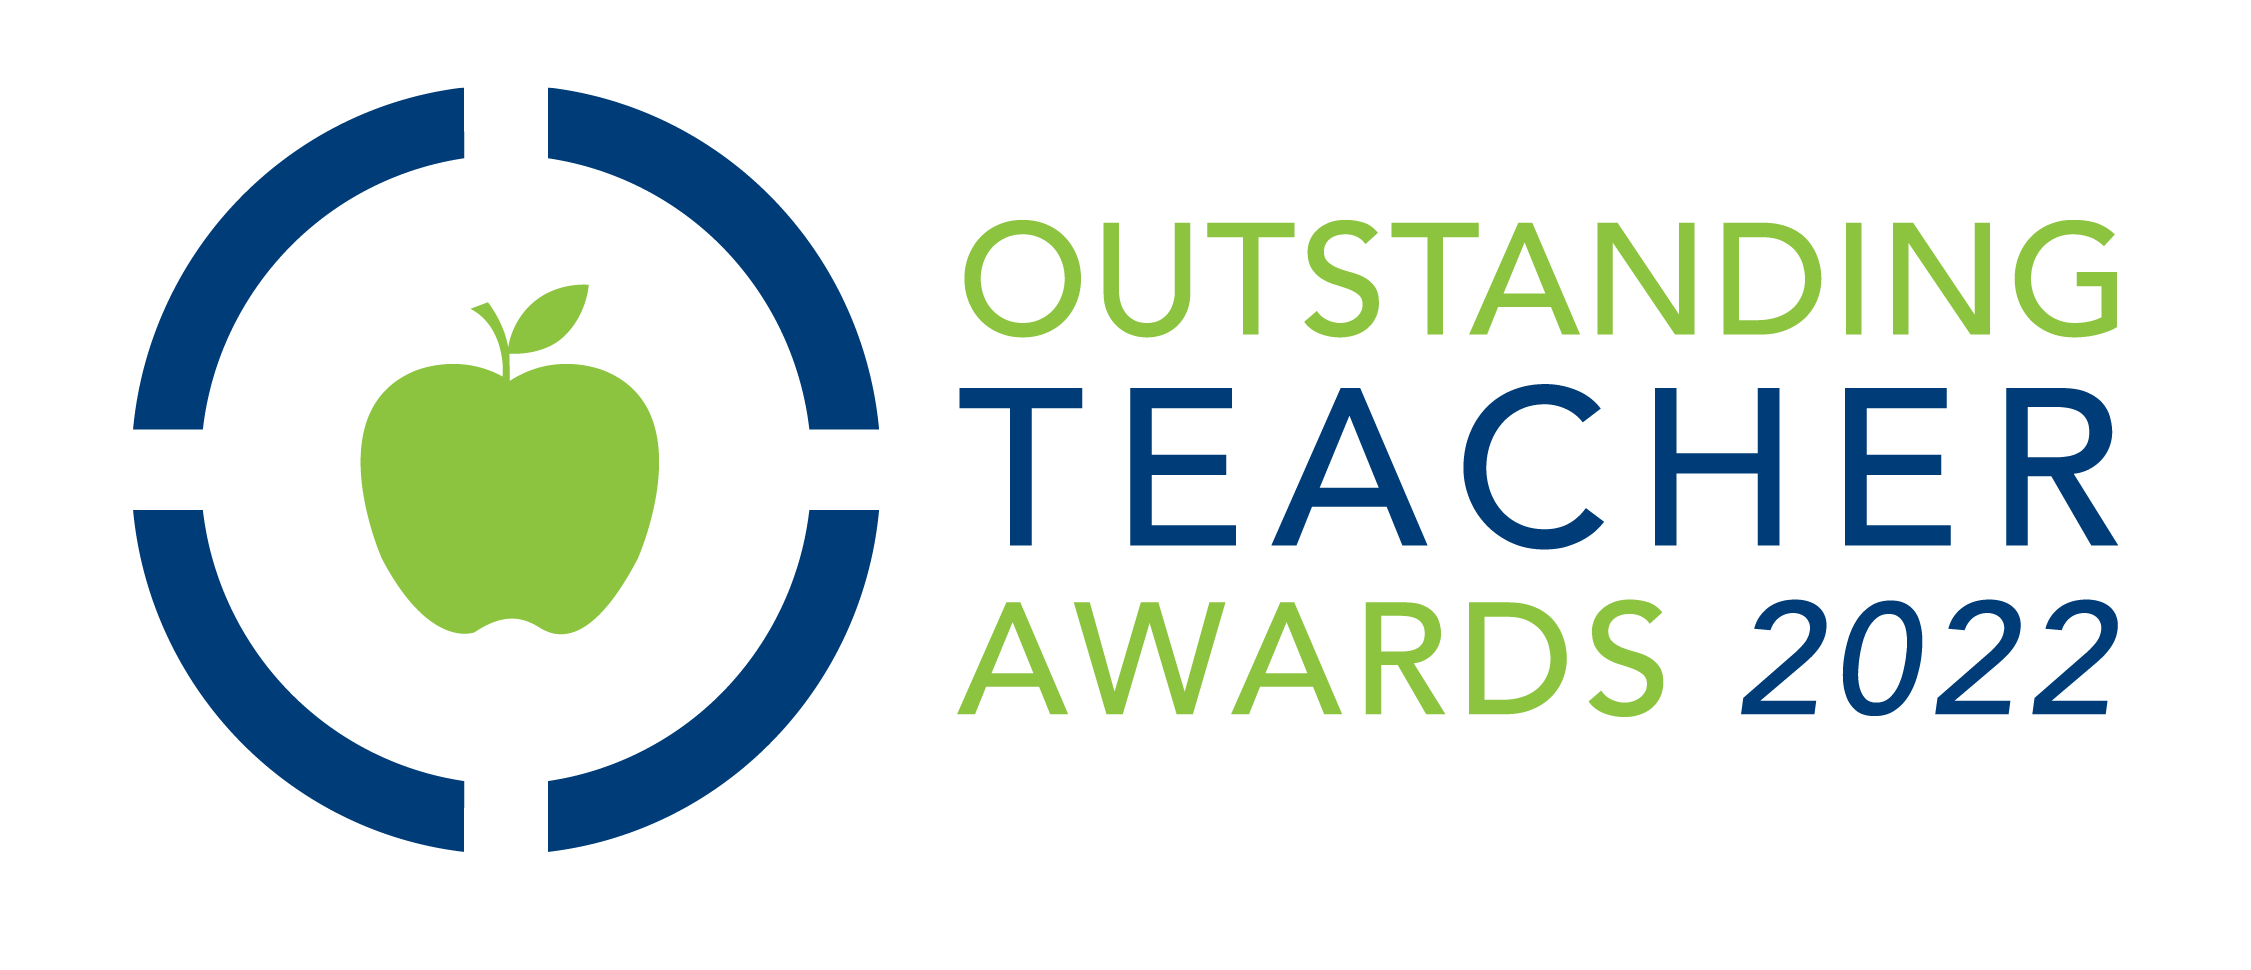 Celebrate Lauren Chancey at the May 5 OTA Awards Ceremony